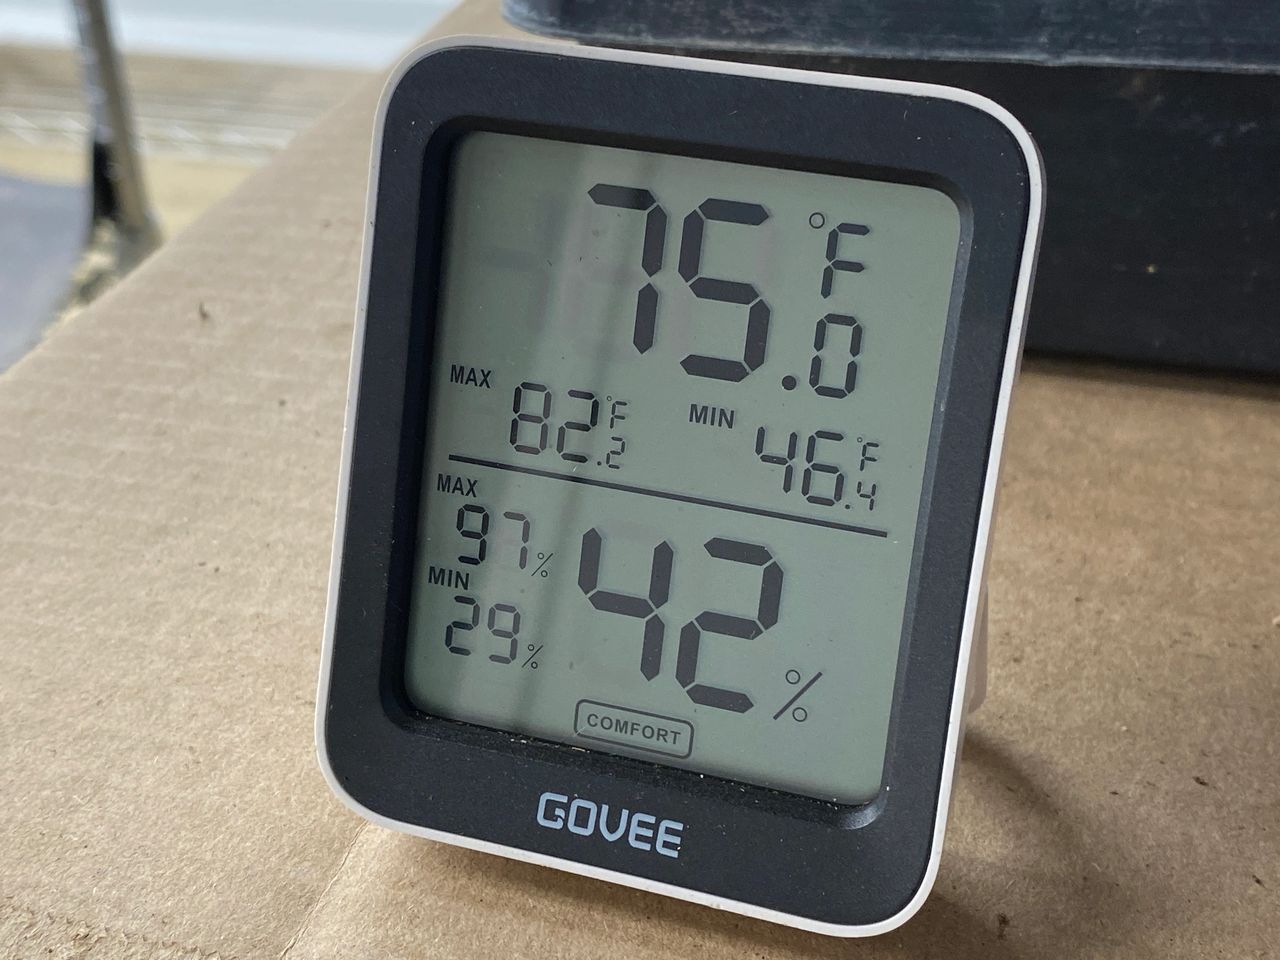 Govee Thermometer Hygrometer Greenhouse